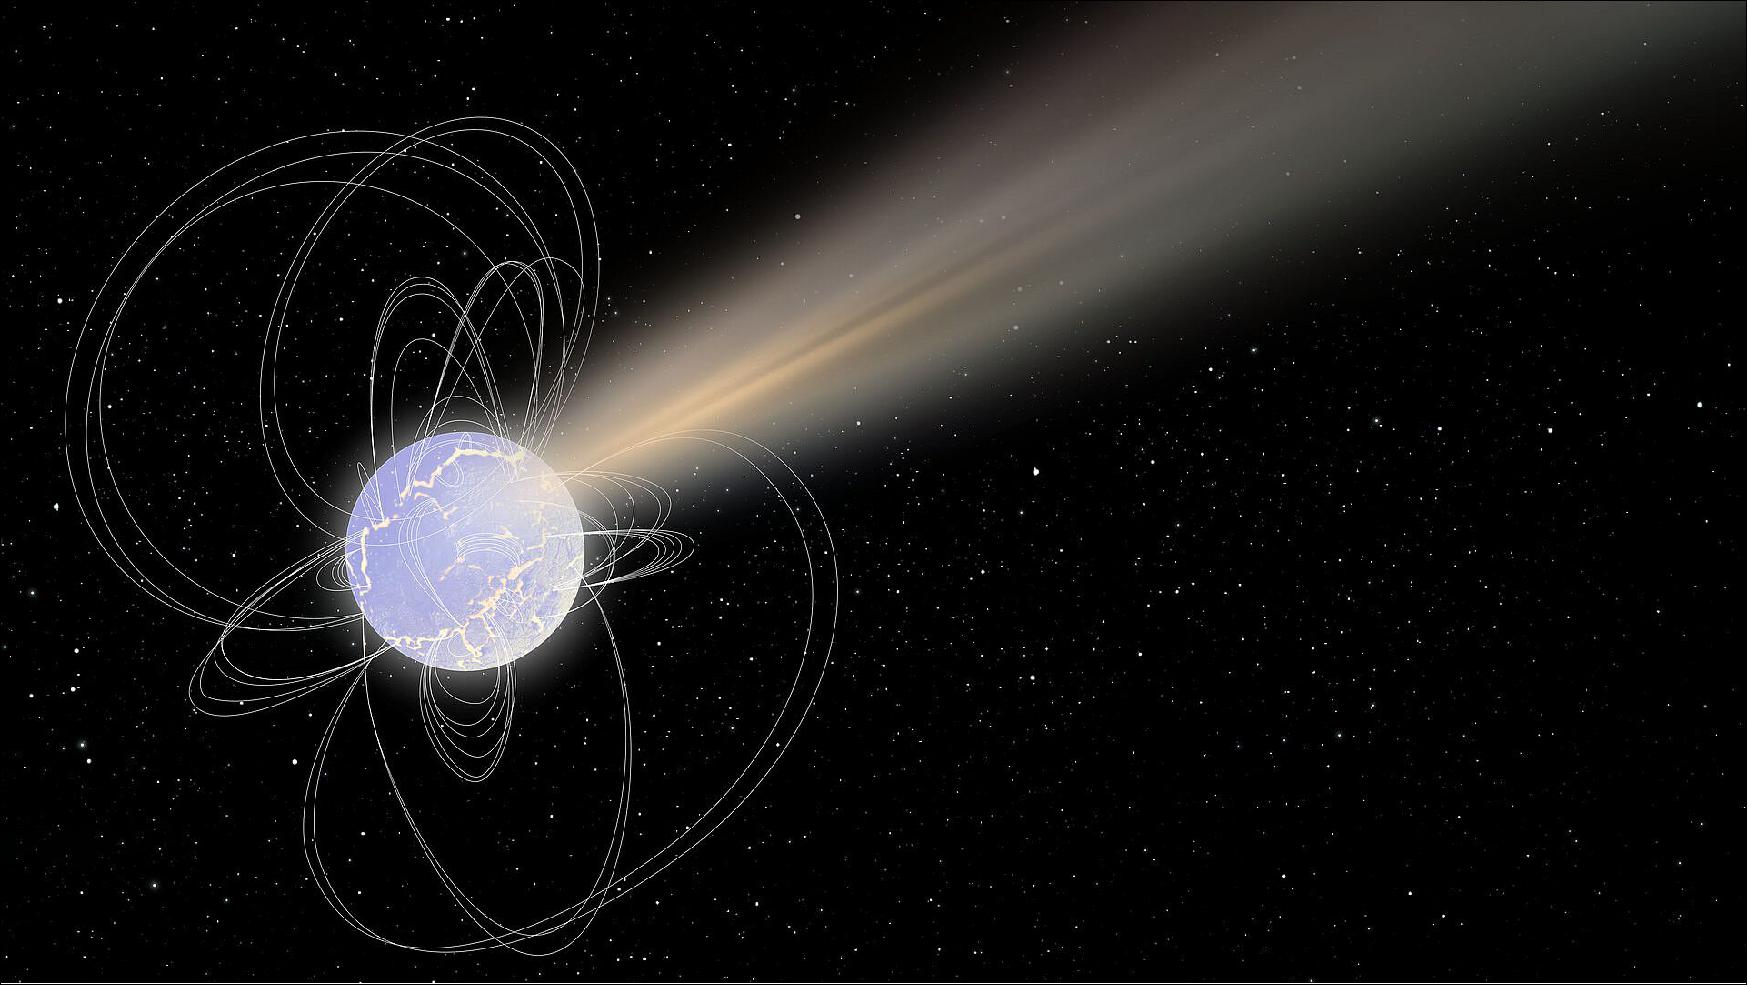 Figure 14: Artist's impression of SGR 1935+2154, a highly magnetized stellar remnant, also known as a magnetar. Discovered in 2014 in the constellation of Vulpecula following a substantial burst of X-rays, the magnetar became active again in April 2020. ESA's Integral high-energy space observatory detected a burst of high-energy, or ‘hard’, X-rays on 28 April, automatically alerting observatories worldwide about the discovery in just seconds. Soon after, astronomers spied something astonishing: this magnetar was not only radiating its usual X-rays, but radio waves, too. This unique mix of radiation, never before seen bursting from such a stellar remnant, may solve a long-standing cosmic mystery about the nature of Fast Radio Bursts – powerful events that pulse brightly in radio waves for just a few milliseconds before fading away, and are only rarely seen again. (image credit: ESA)